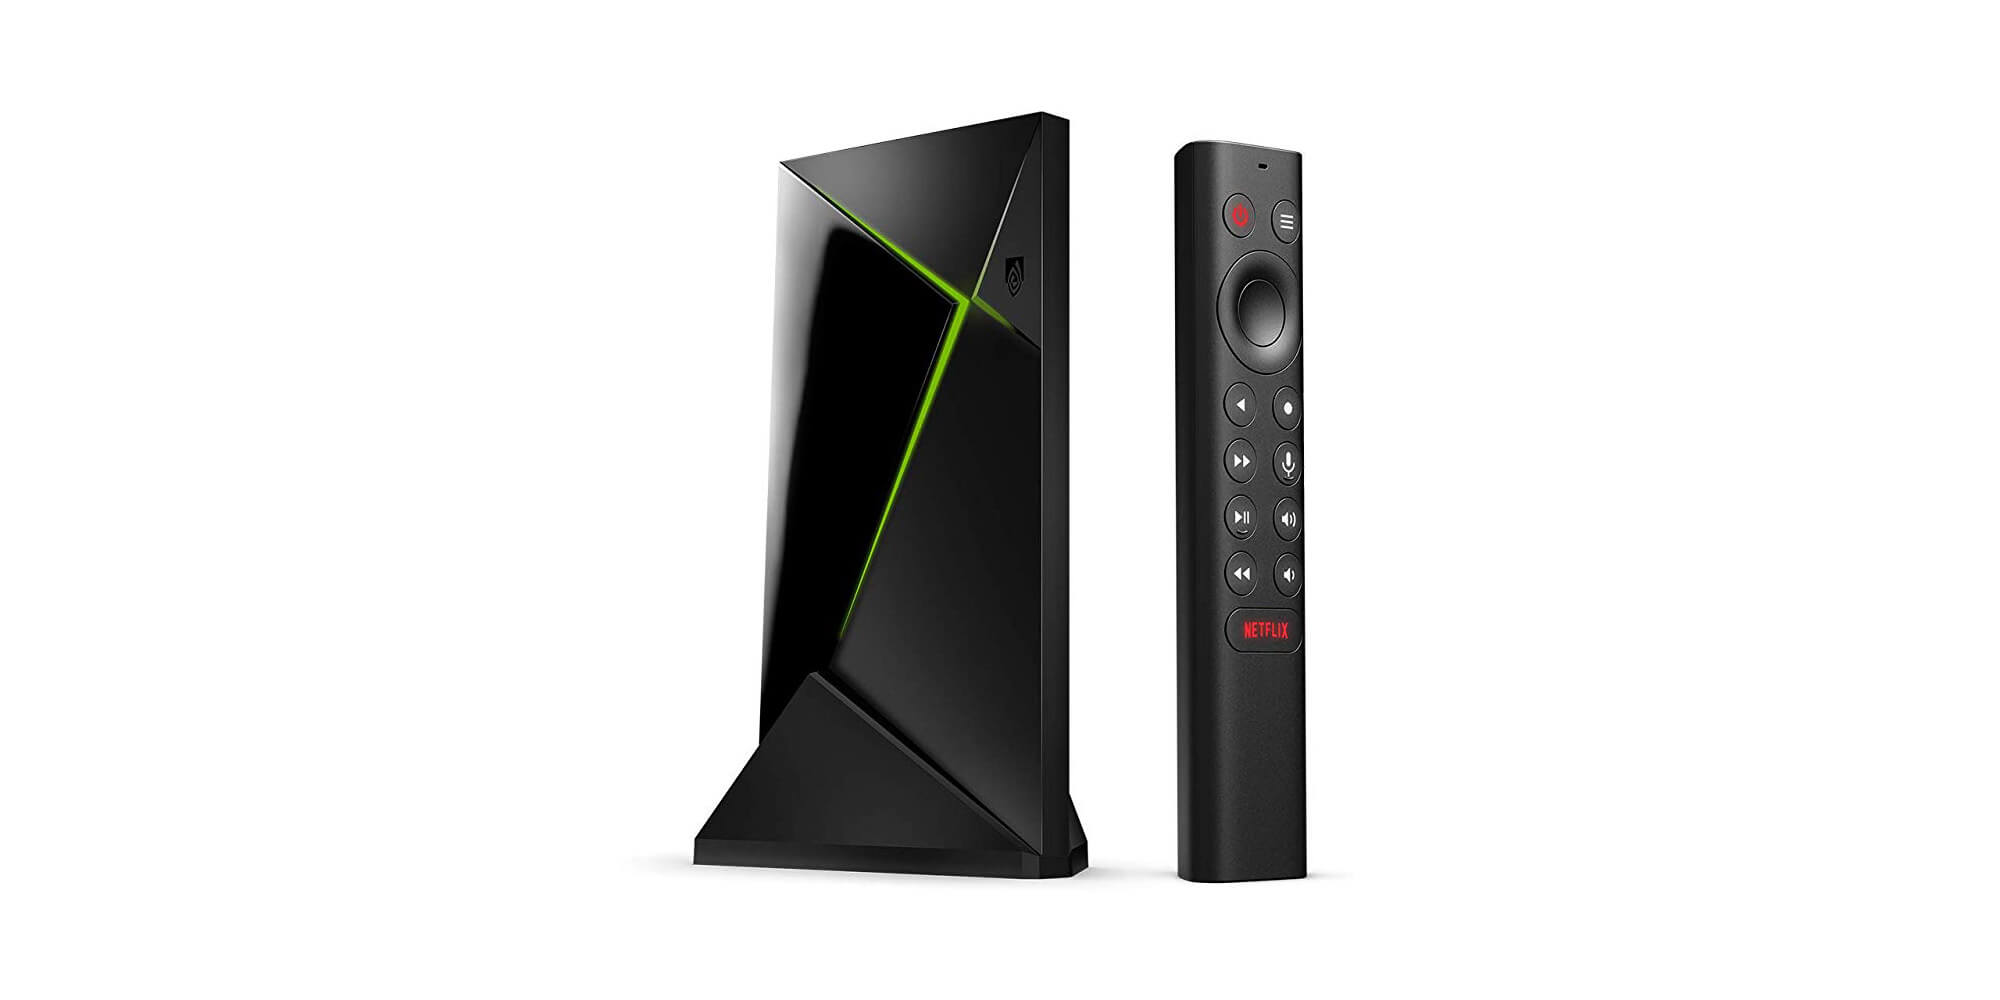 Nvidia's updated streaming box is called the Shield TV Pro